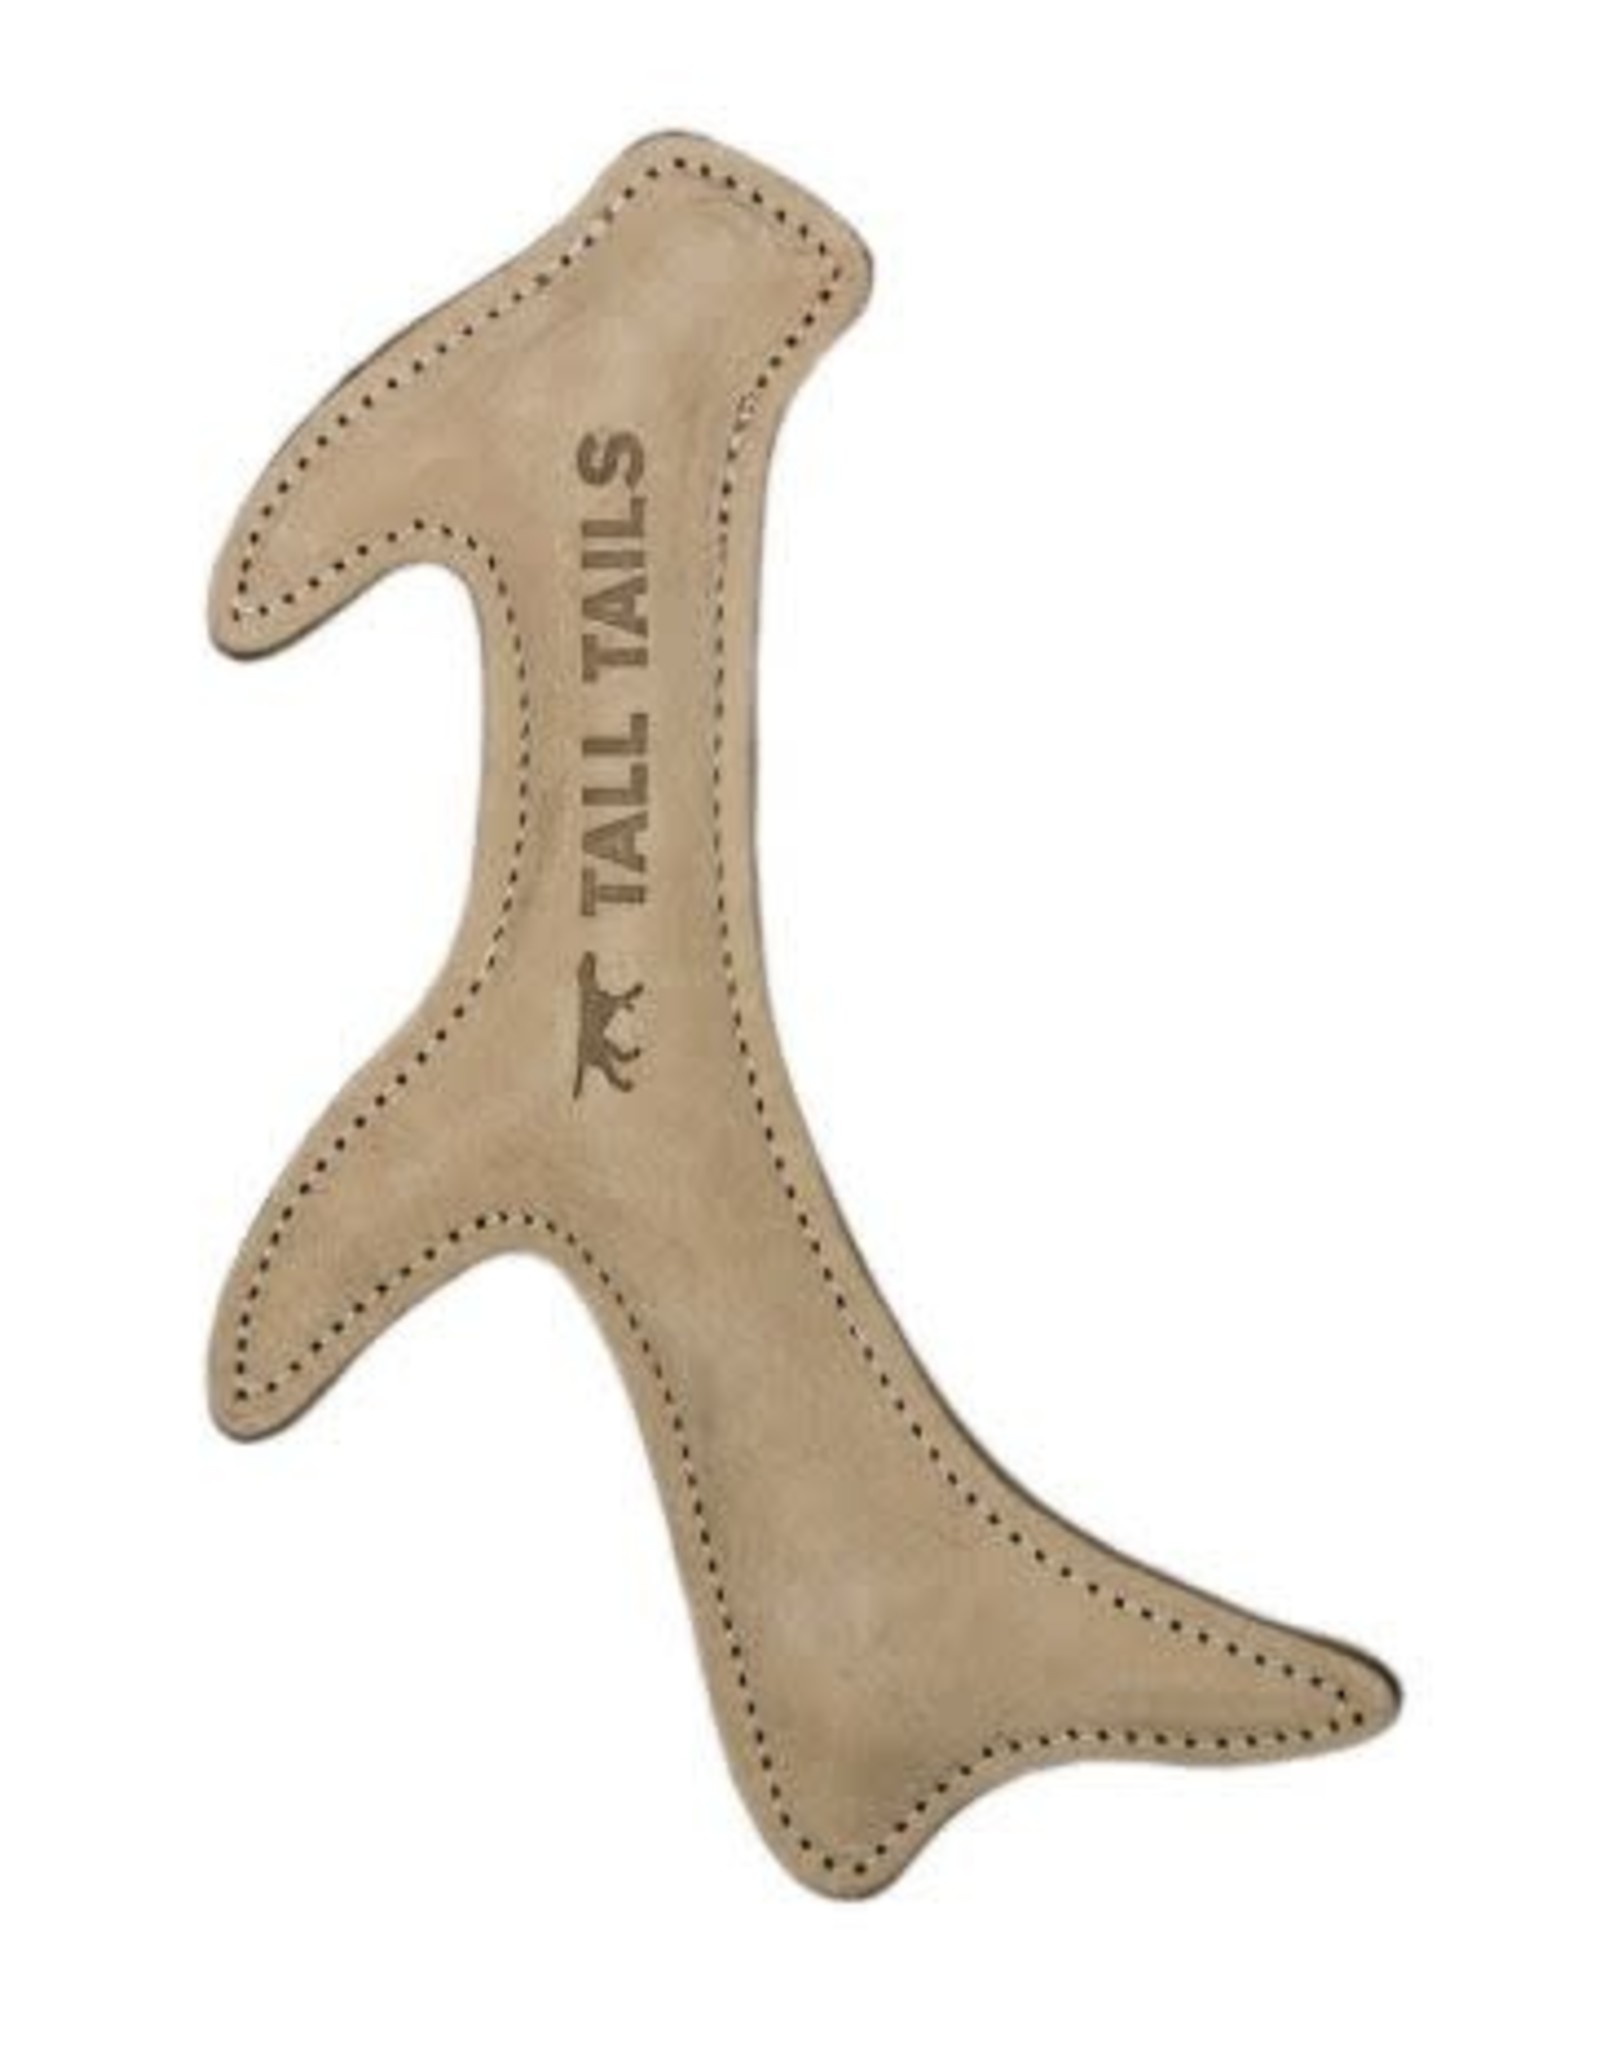 Tall Tails Tall Tails Natural Leather Antler